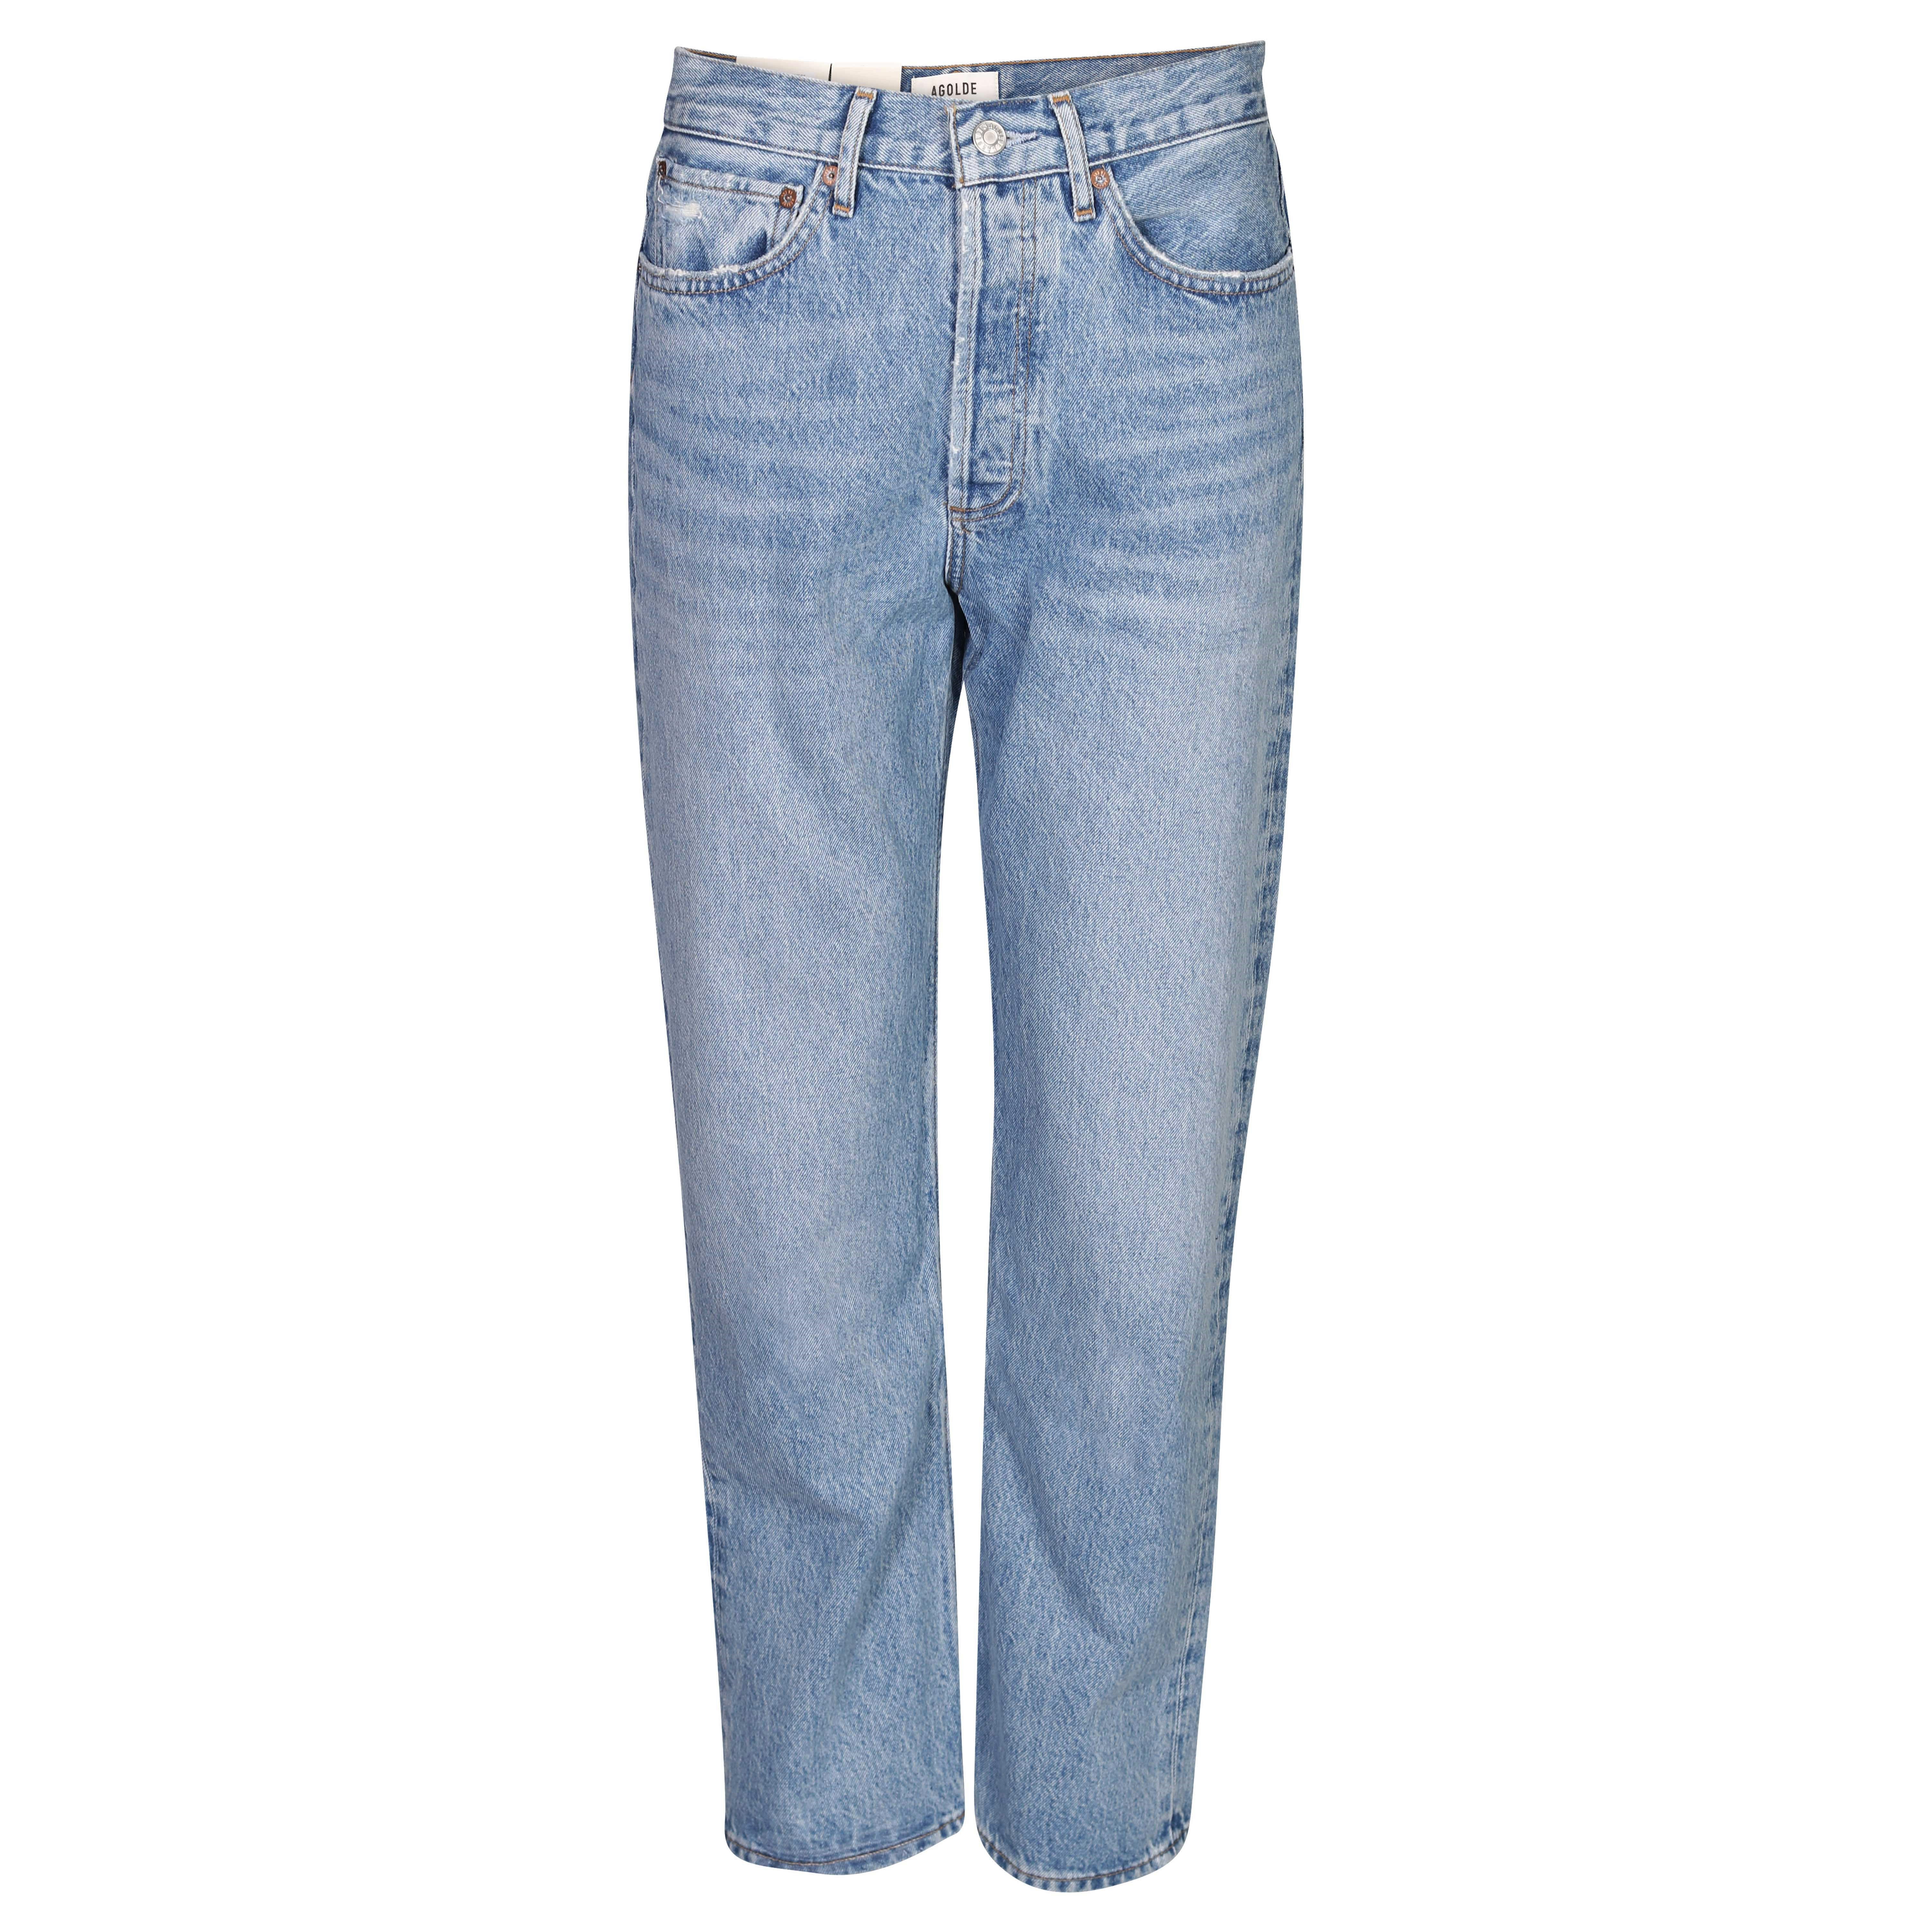 Agolde Jeans 90s Cropped in Scheme Washing W 27